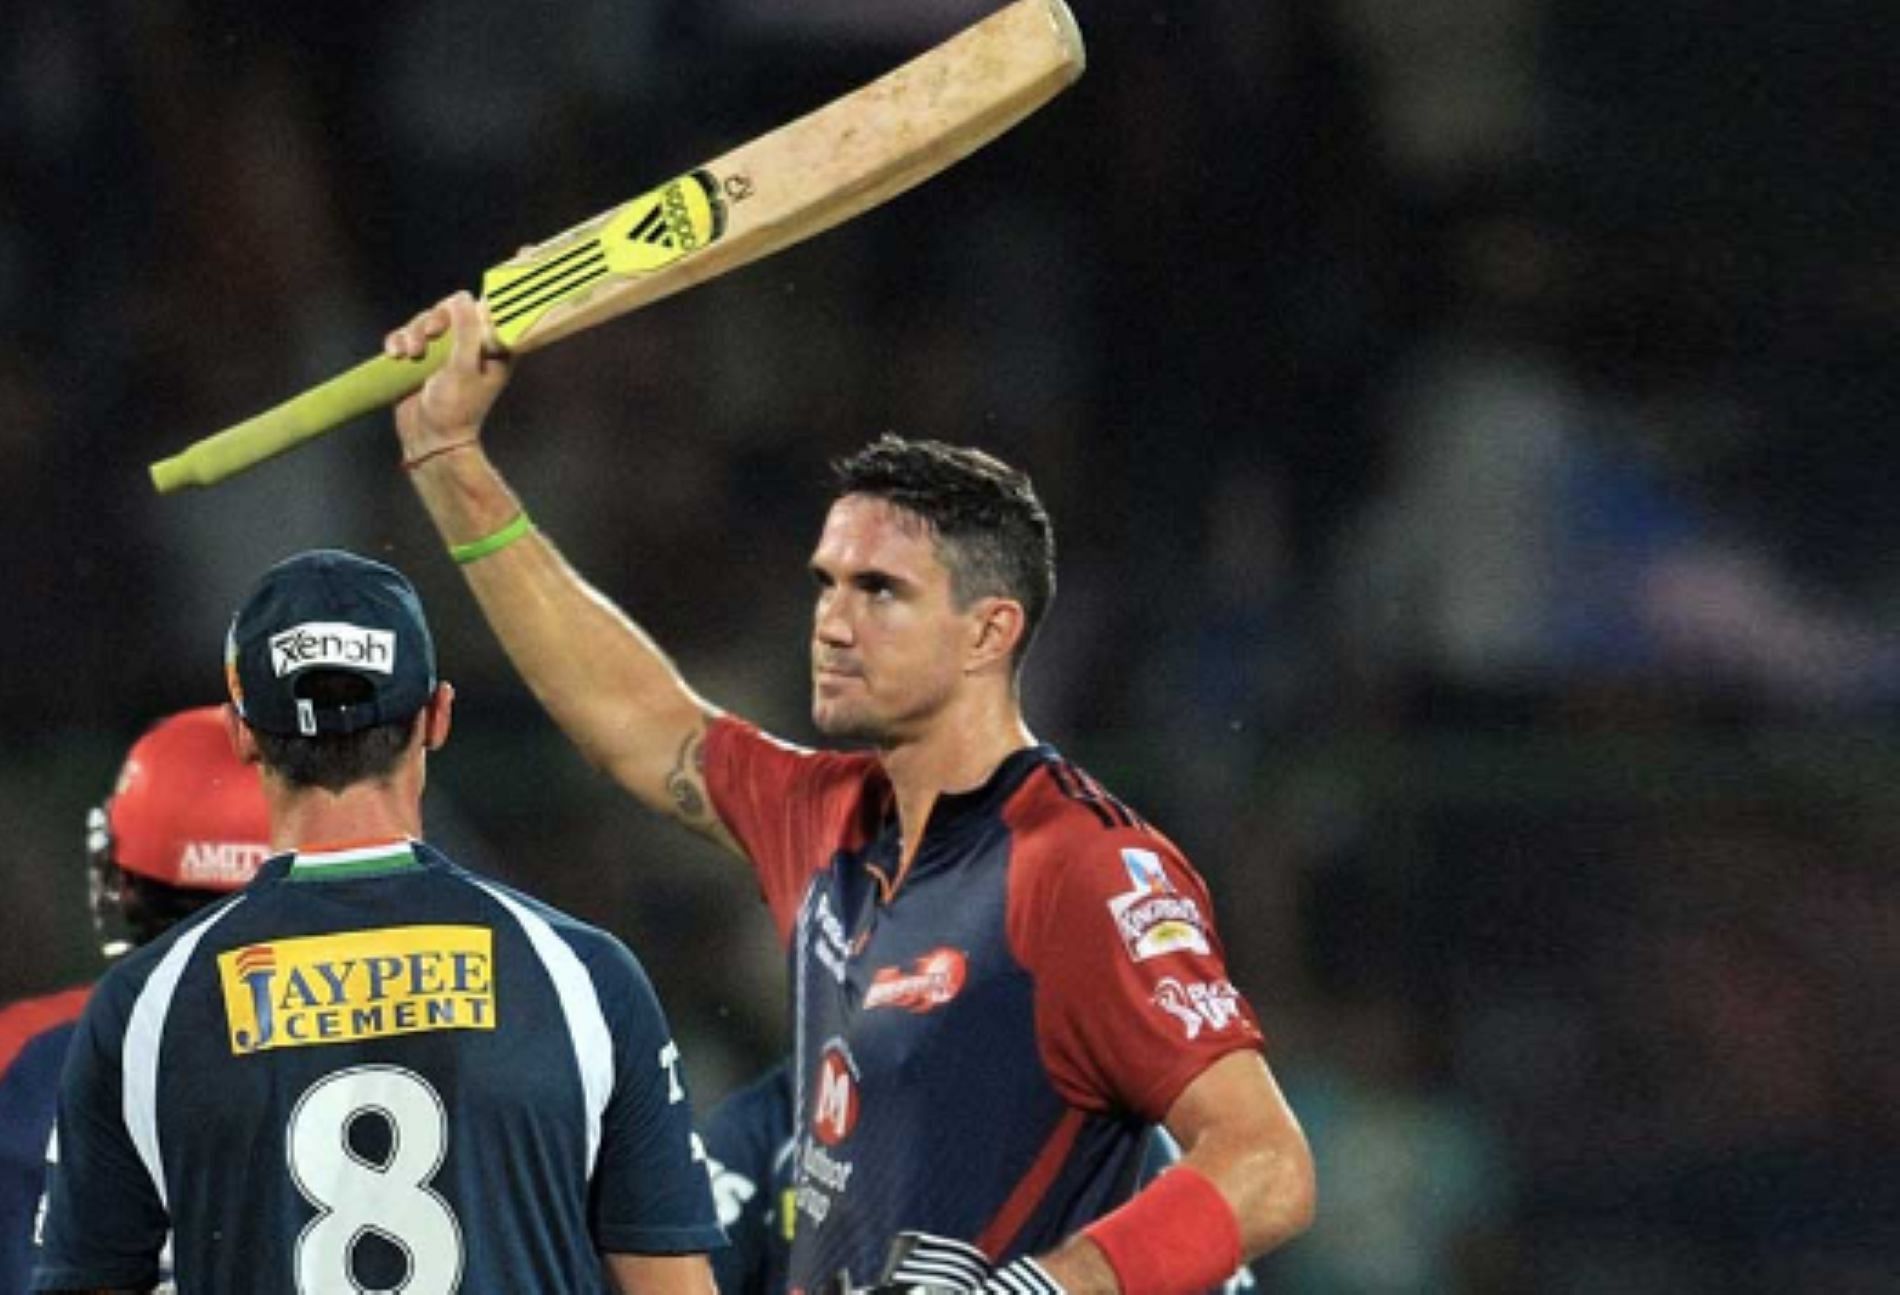 Kevin Pietersen scored his lone IPL century for the Delhi franchise in 2012.